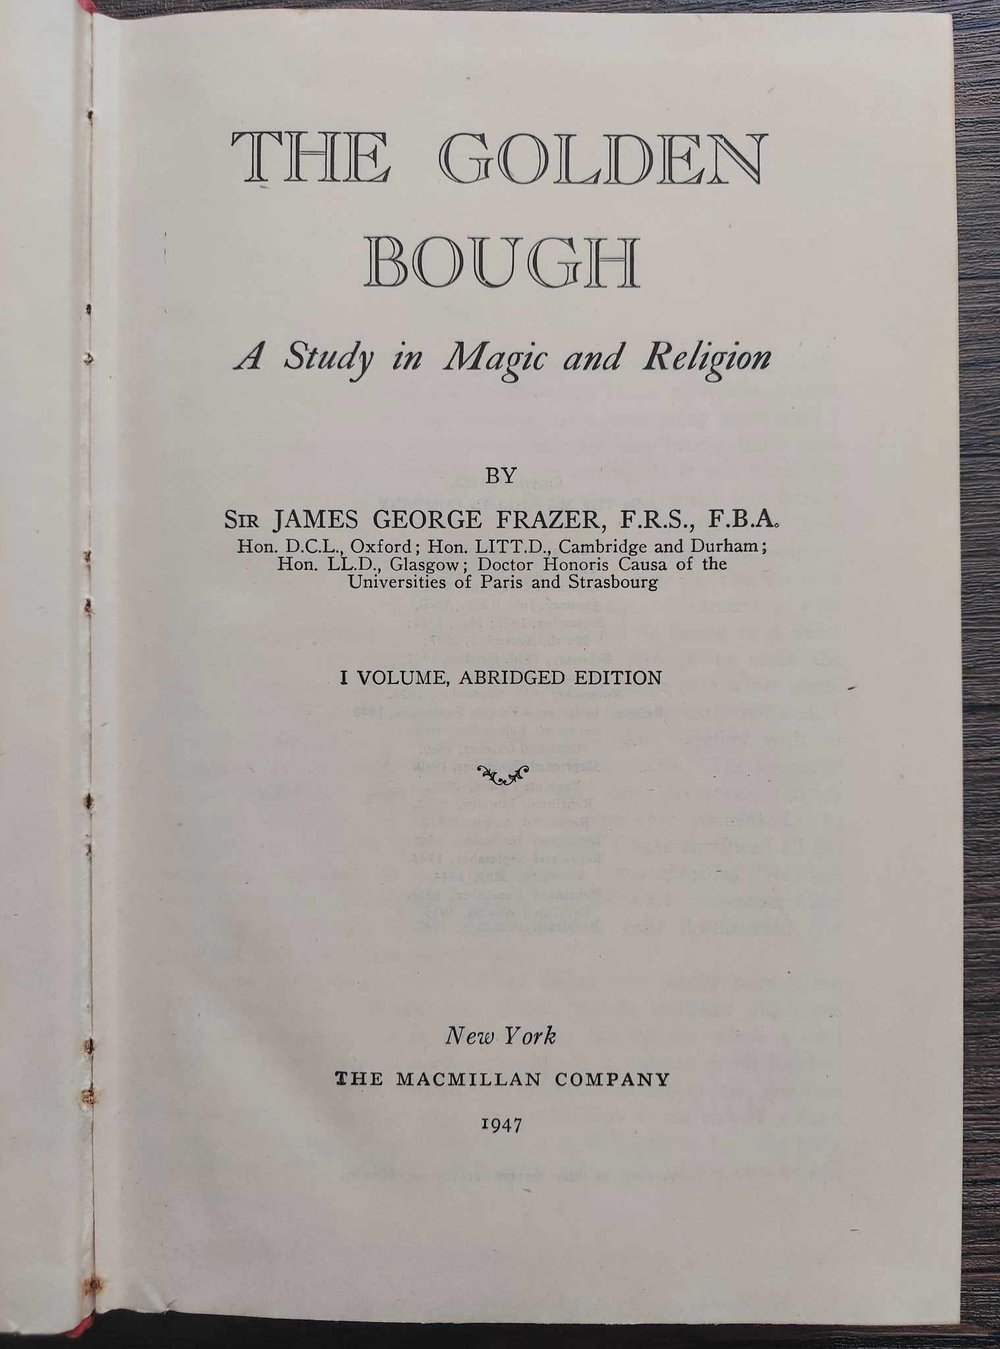 The Golden Bough: A Study in Magic and Religion, by Sir James George Frazer